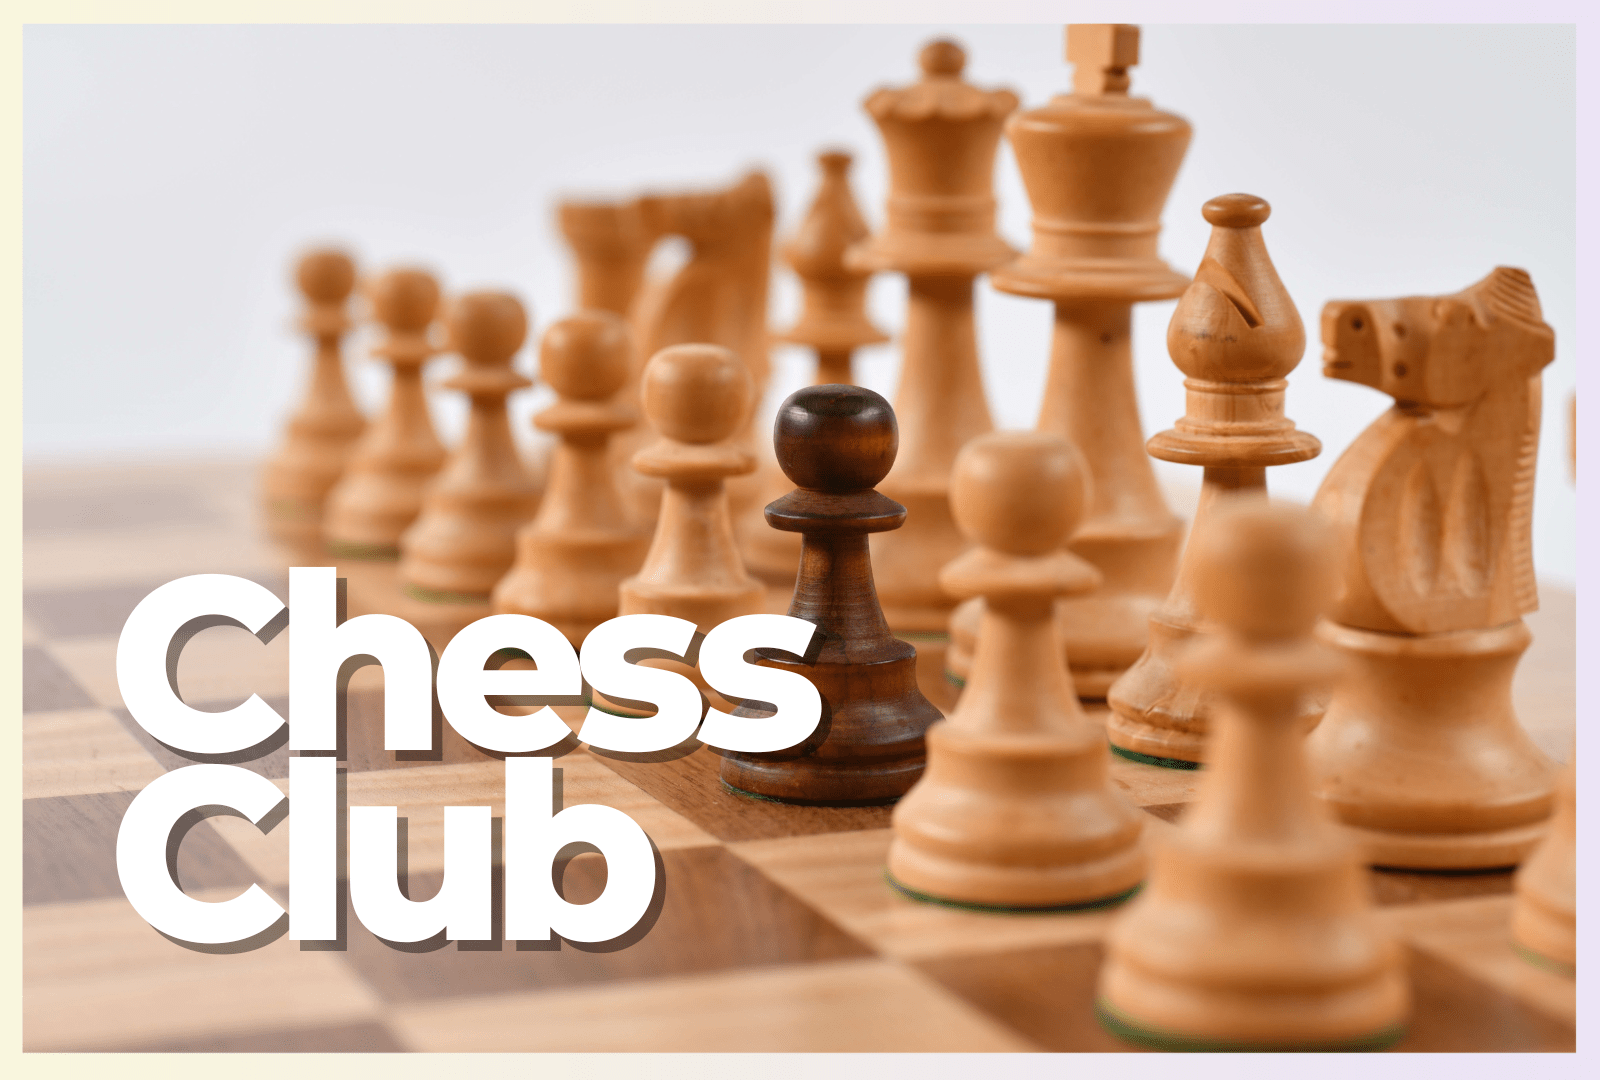 An image of chess pieces with the word 'Chess Club' overlaid.